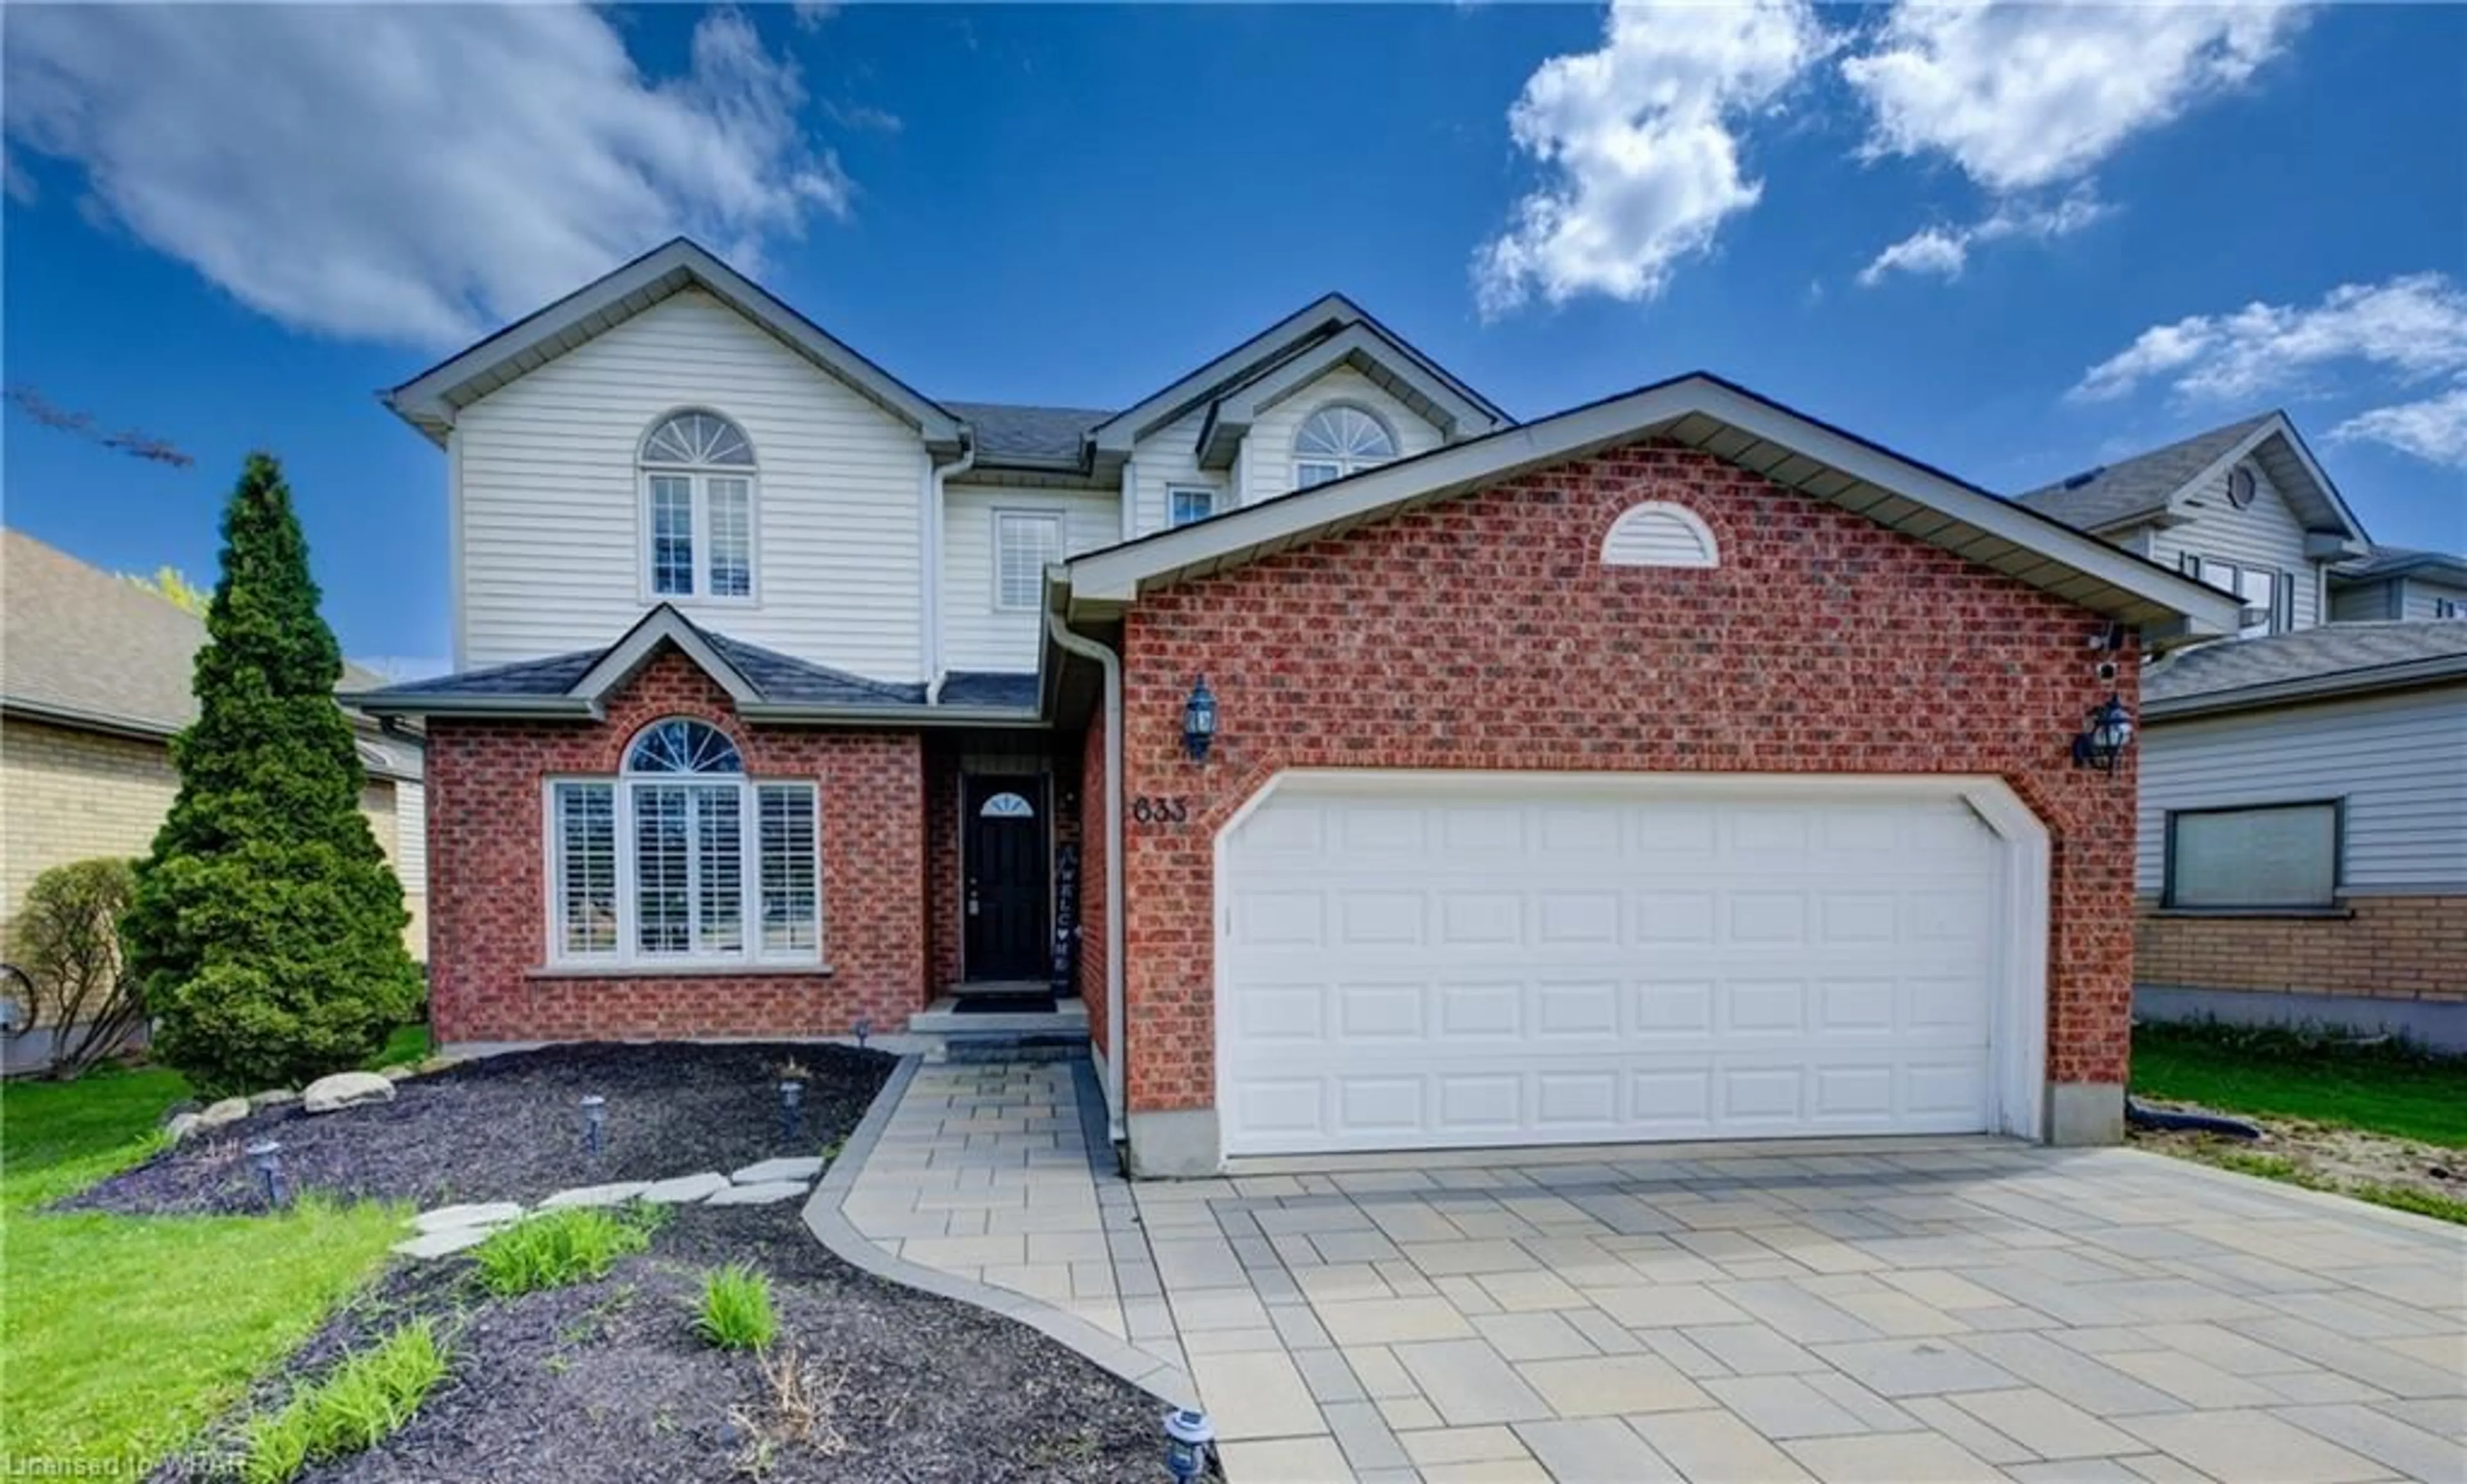 Home with brick exterior material for 633 Cardiff St, Waterloo Ontario N2T 2P2